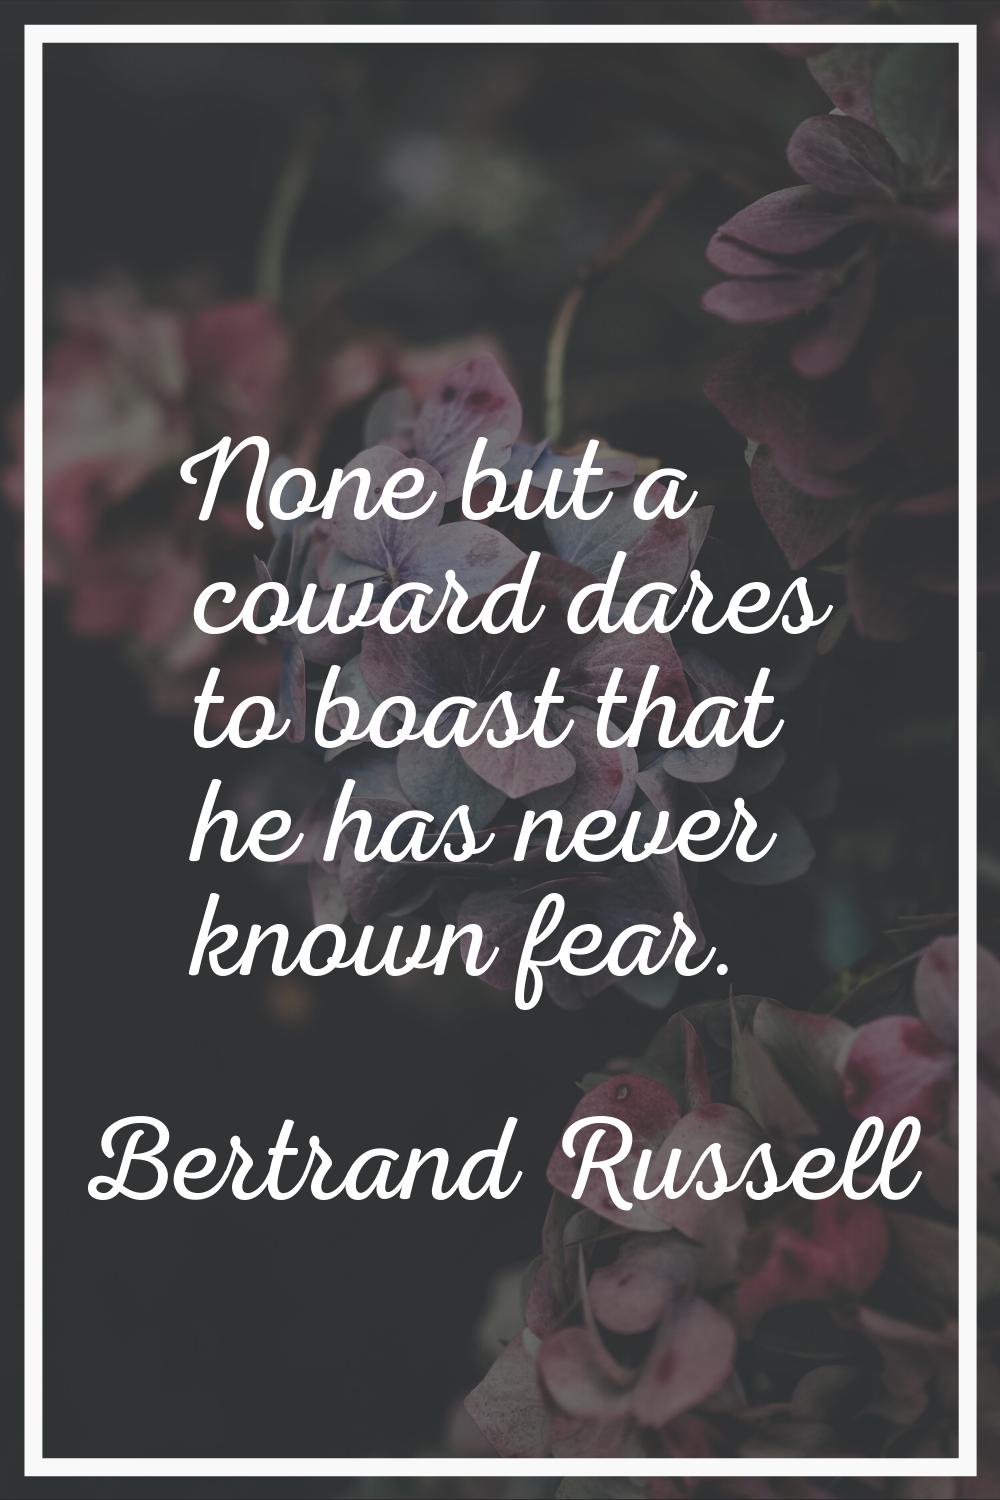 None but a coward dares to boast that he has never known fear.